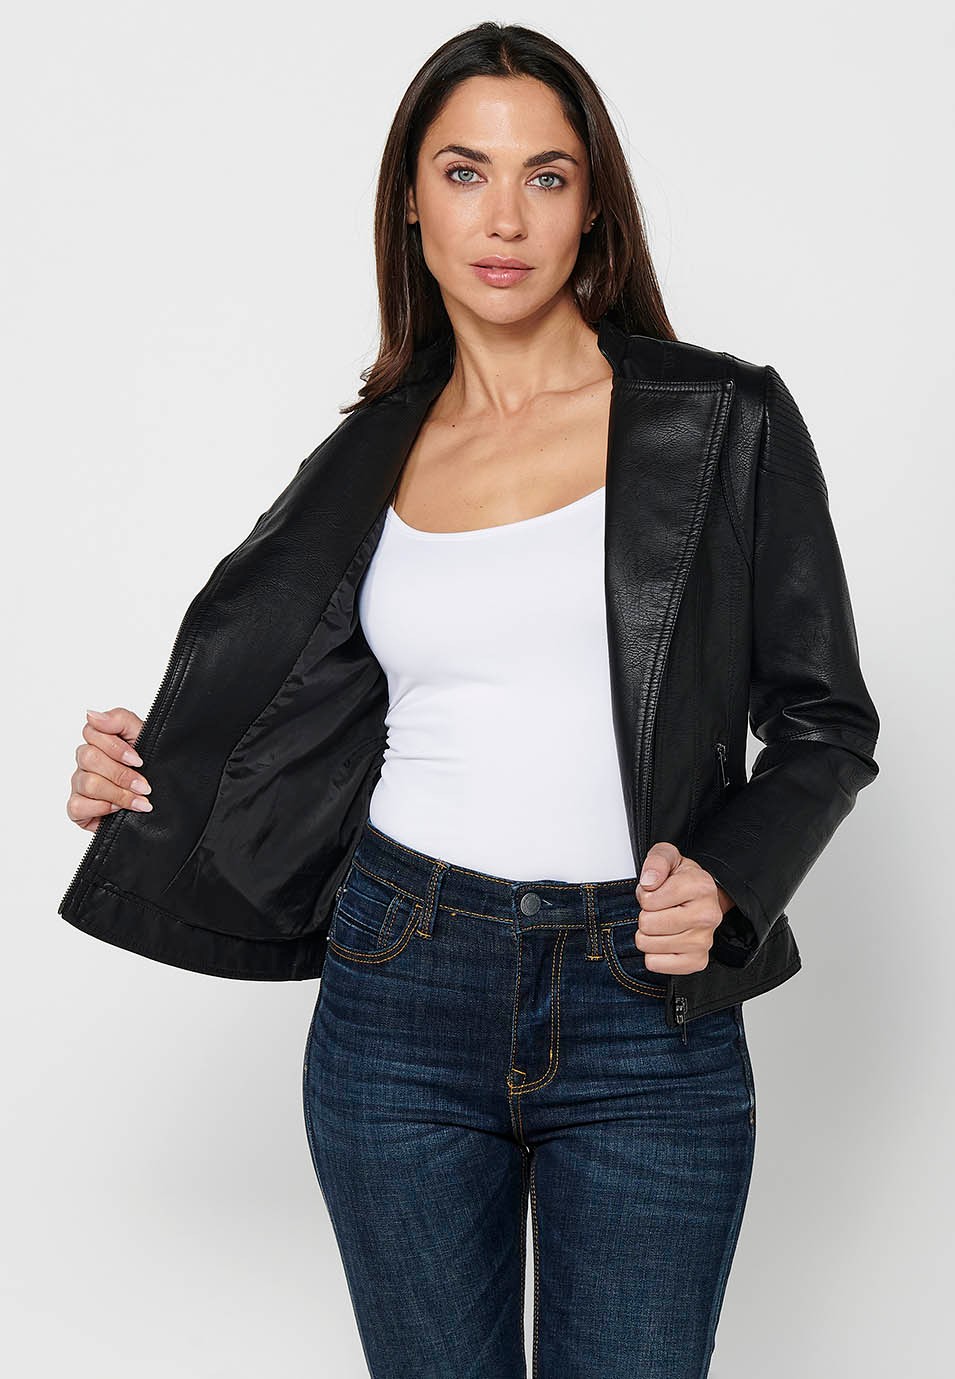 Long-sleeved high-neck jacket with front zipper closure and details on the shoulders with front pockets in Black for Women 7